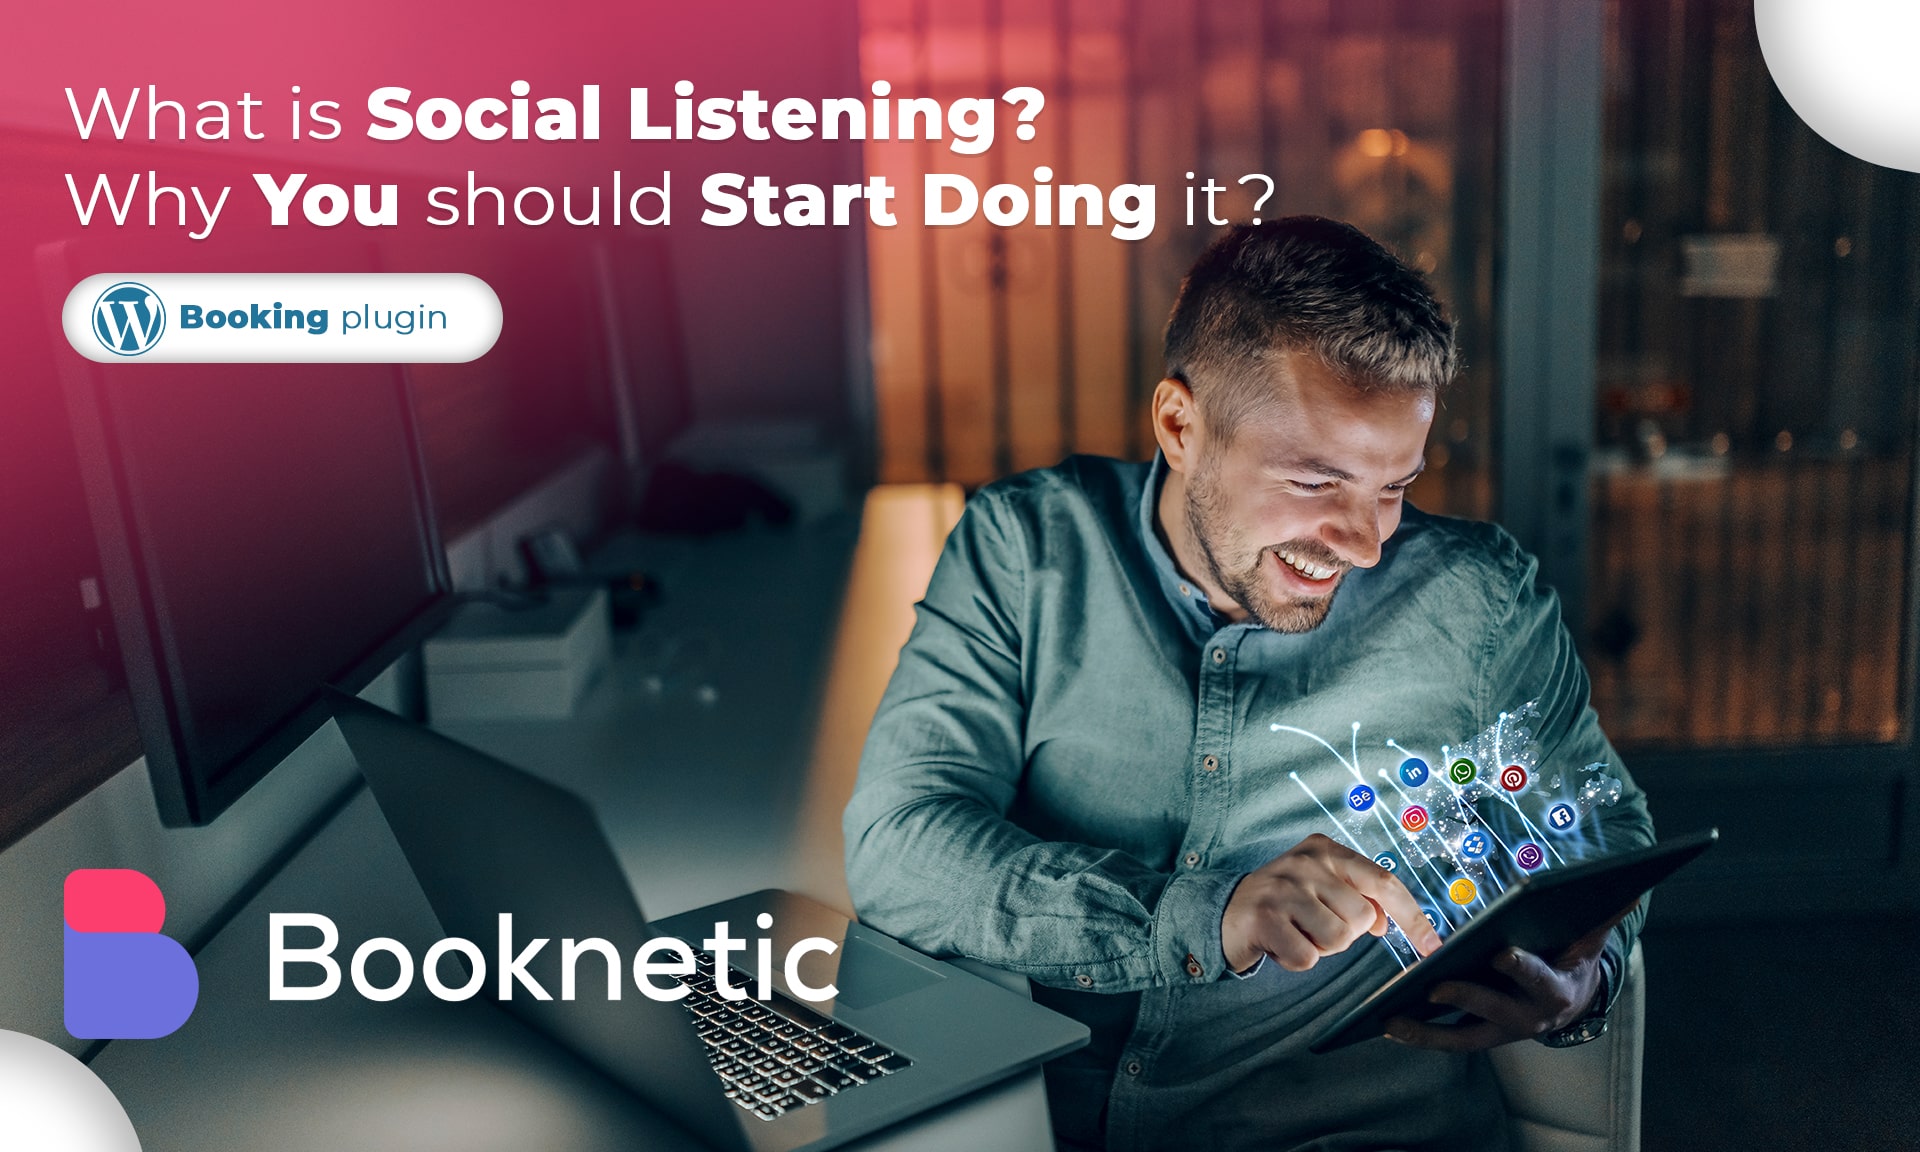 What is Social Listening? Why Should You Start Doing It?